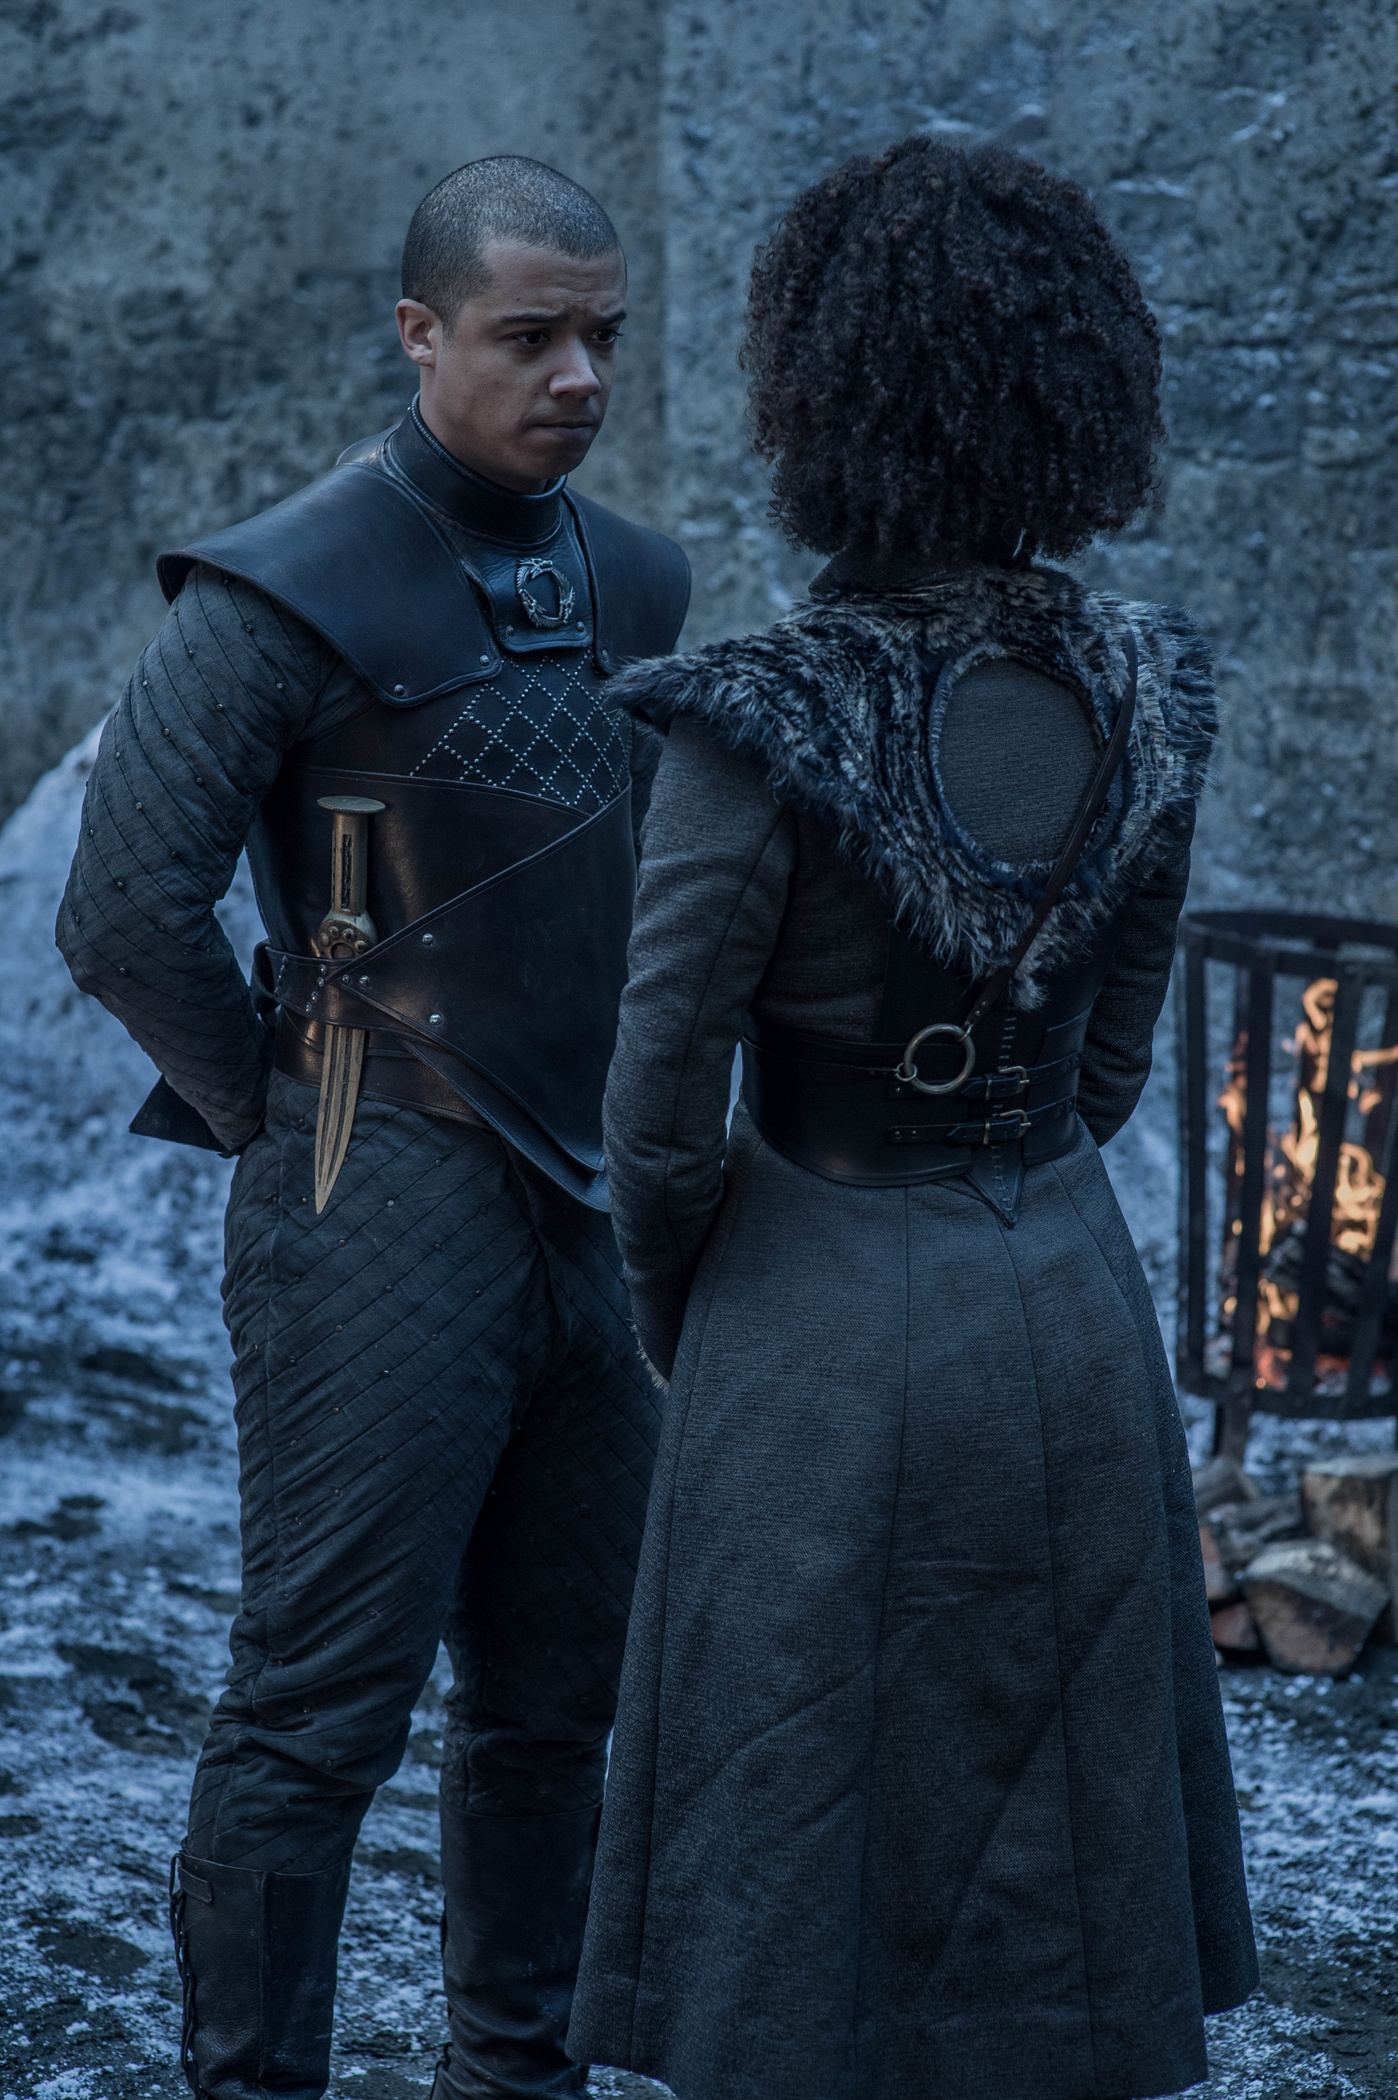 Jacob Anderson as Grey Worm and Nathalie Emmanuel as Missandei. (Helen Sloan/HBO)